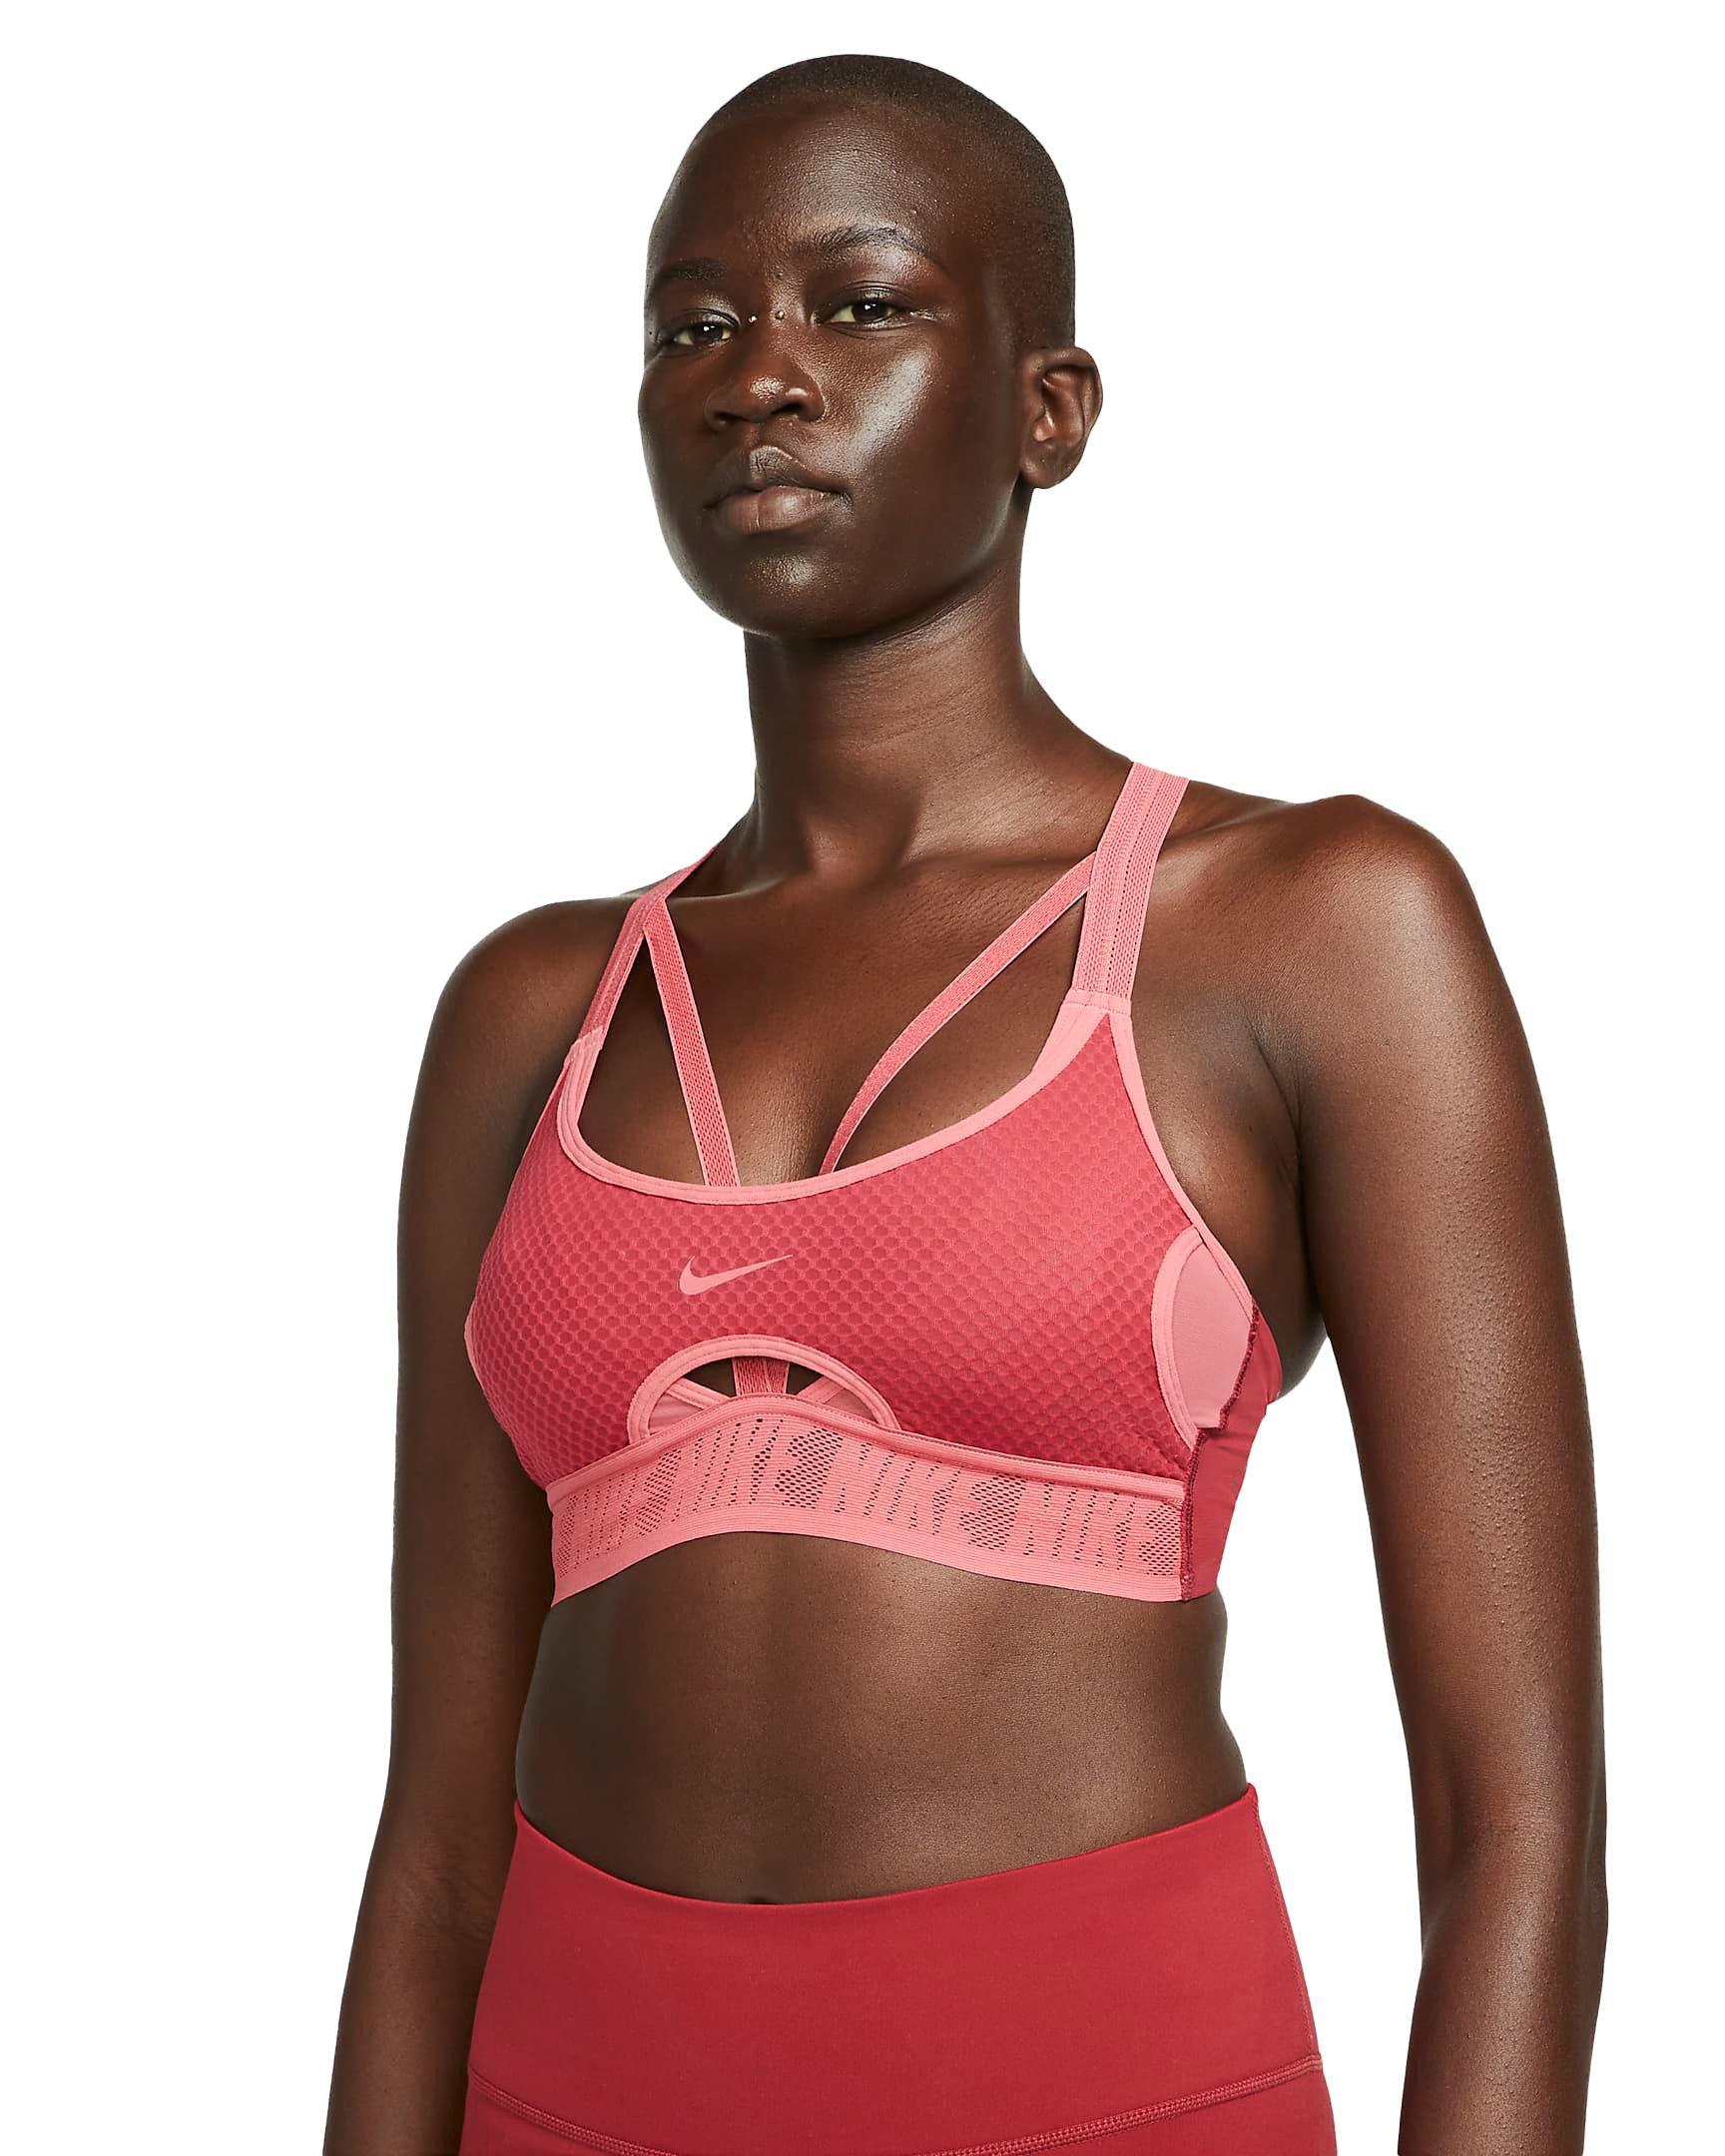 The good old Nike Indy sports bra is my all time favorite. Medium